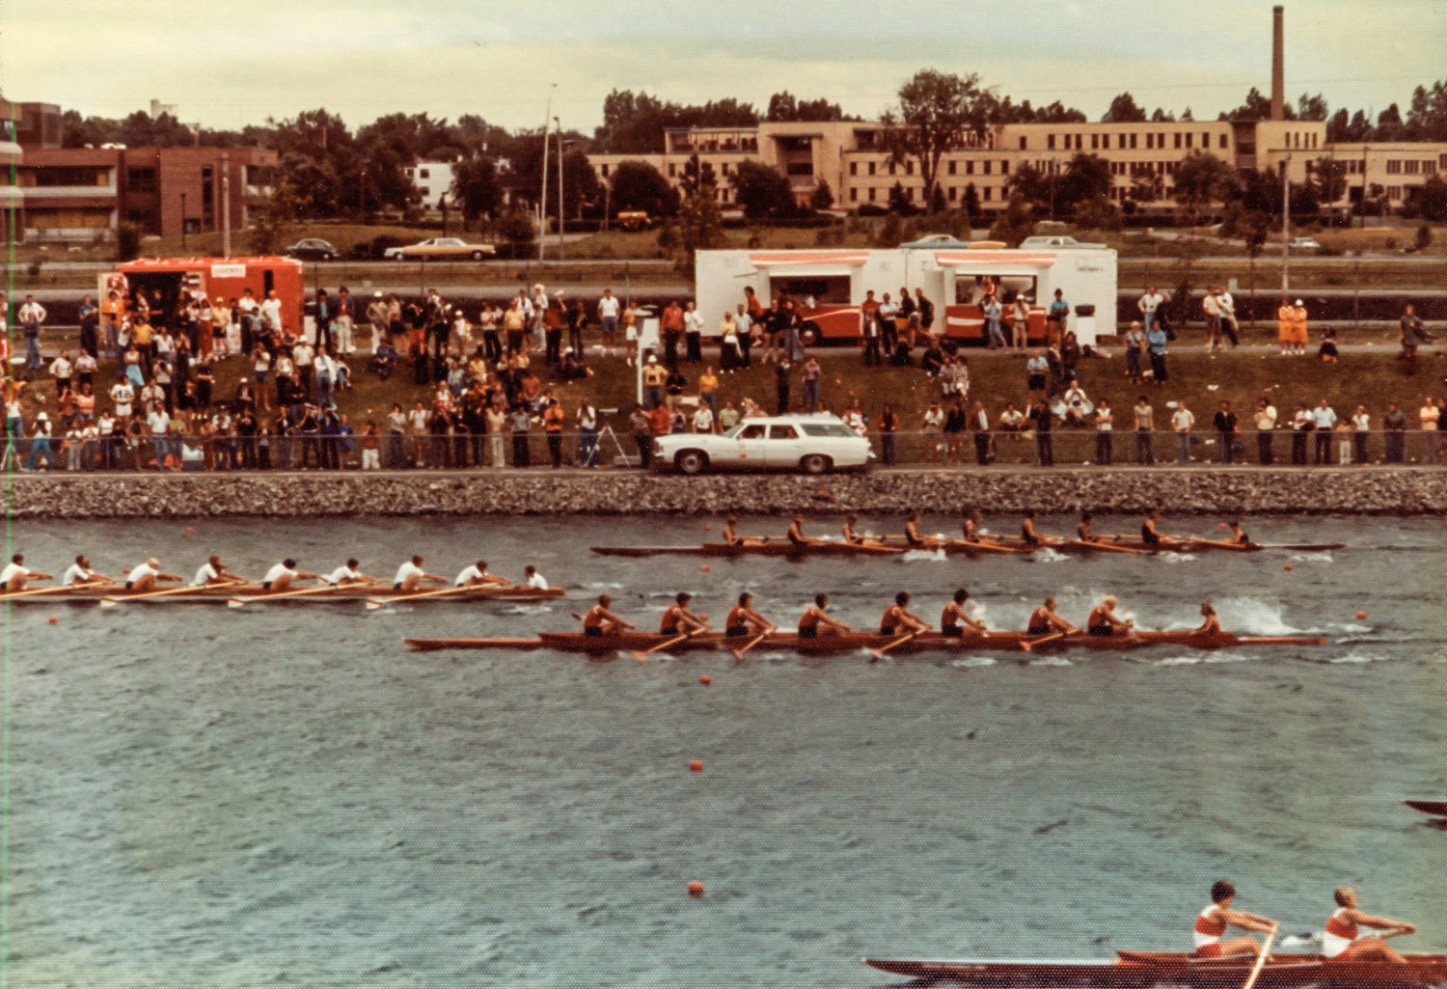 Women's rowing made its Olympic debut at Montreal 1976 ©Concept2